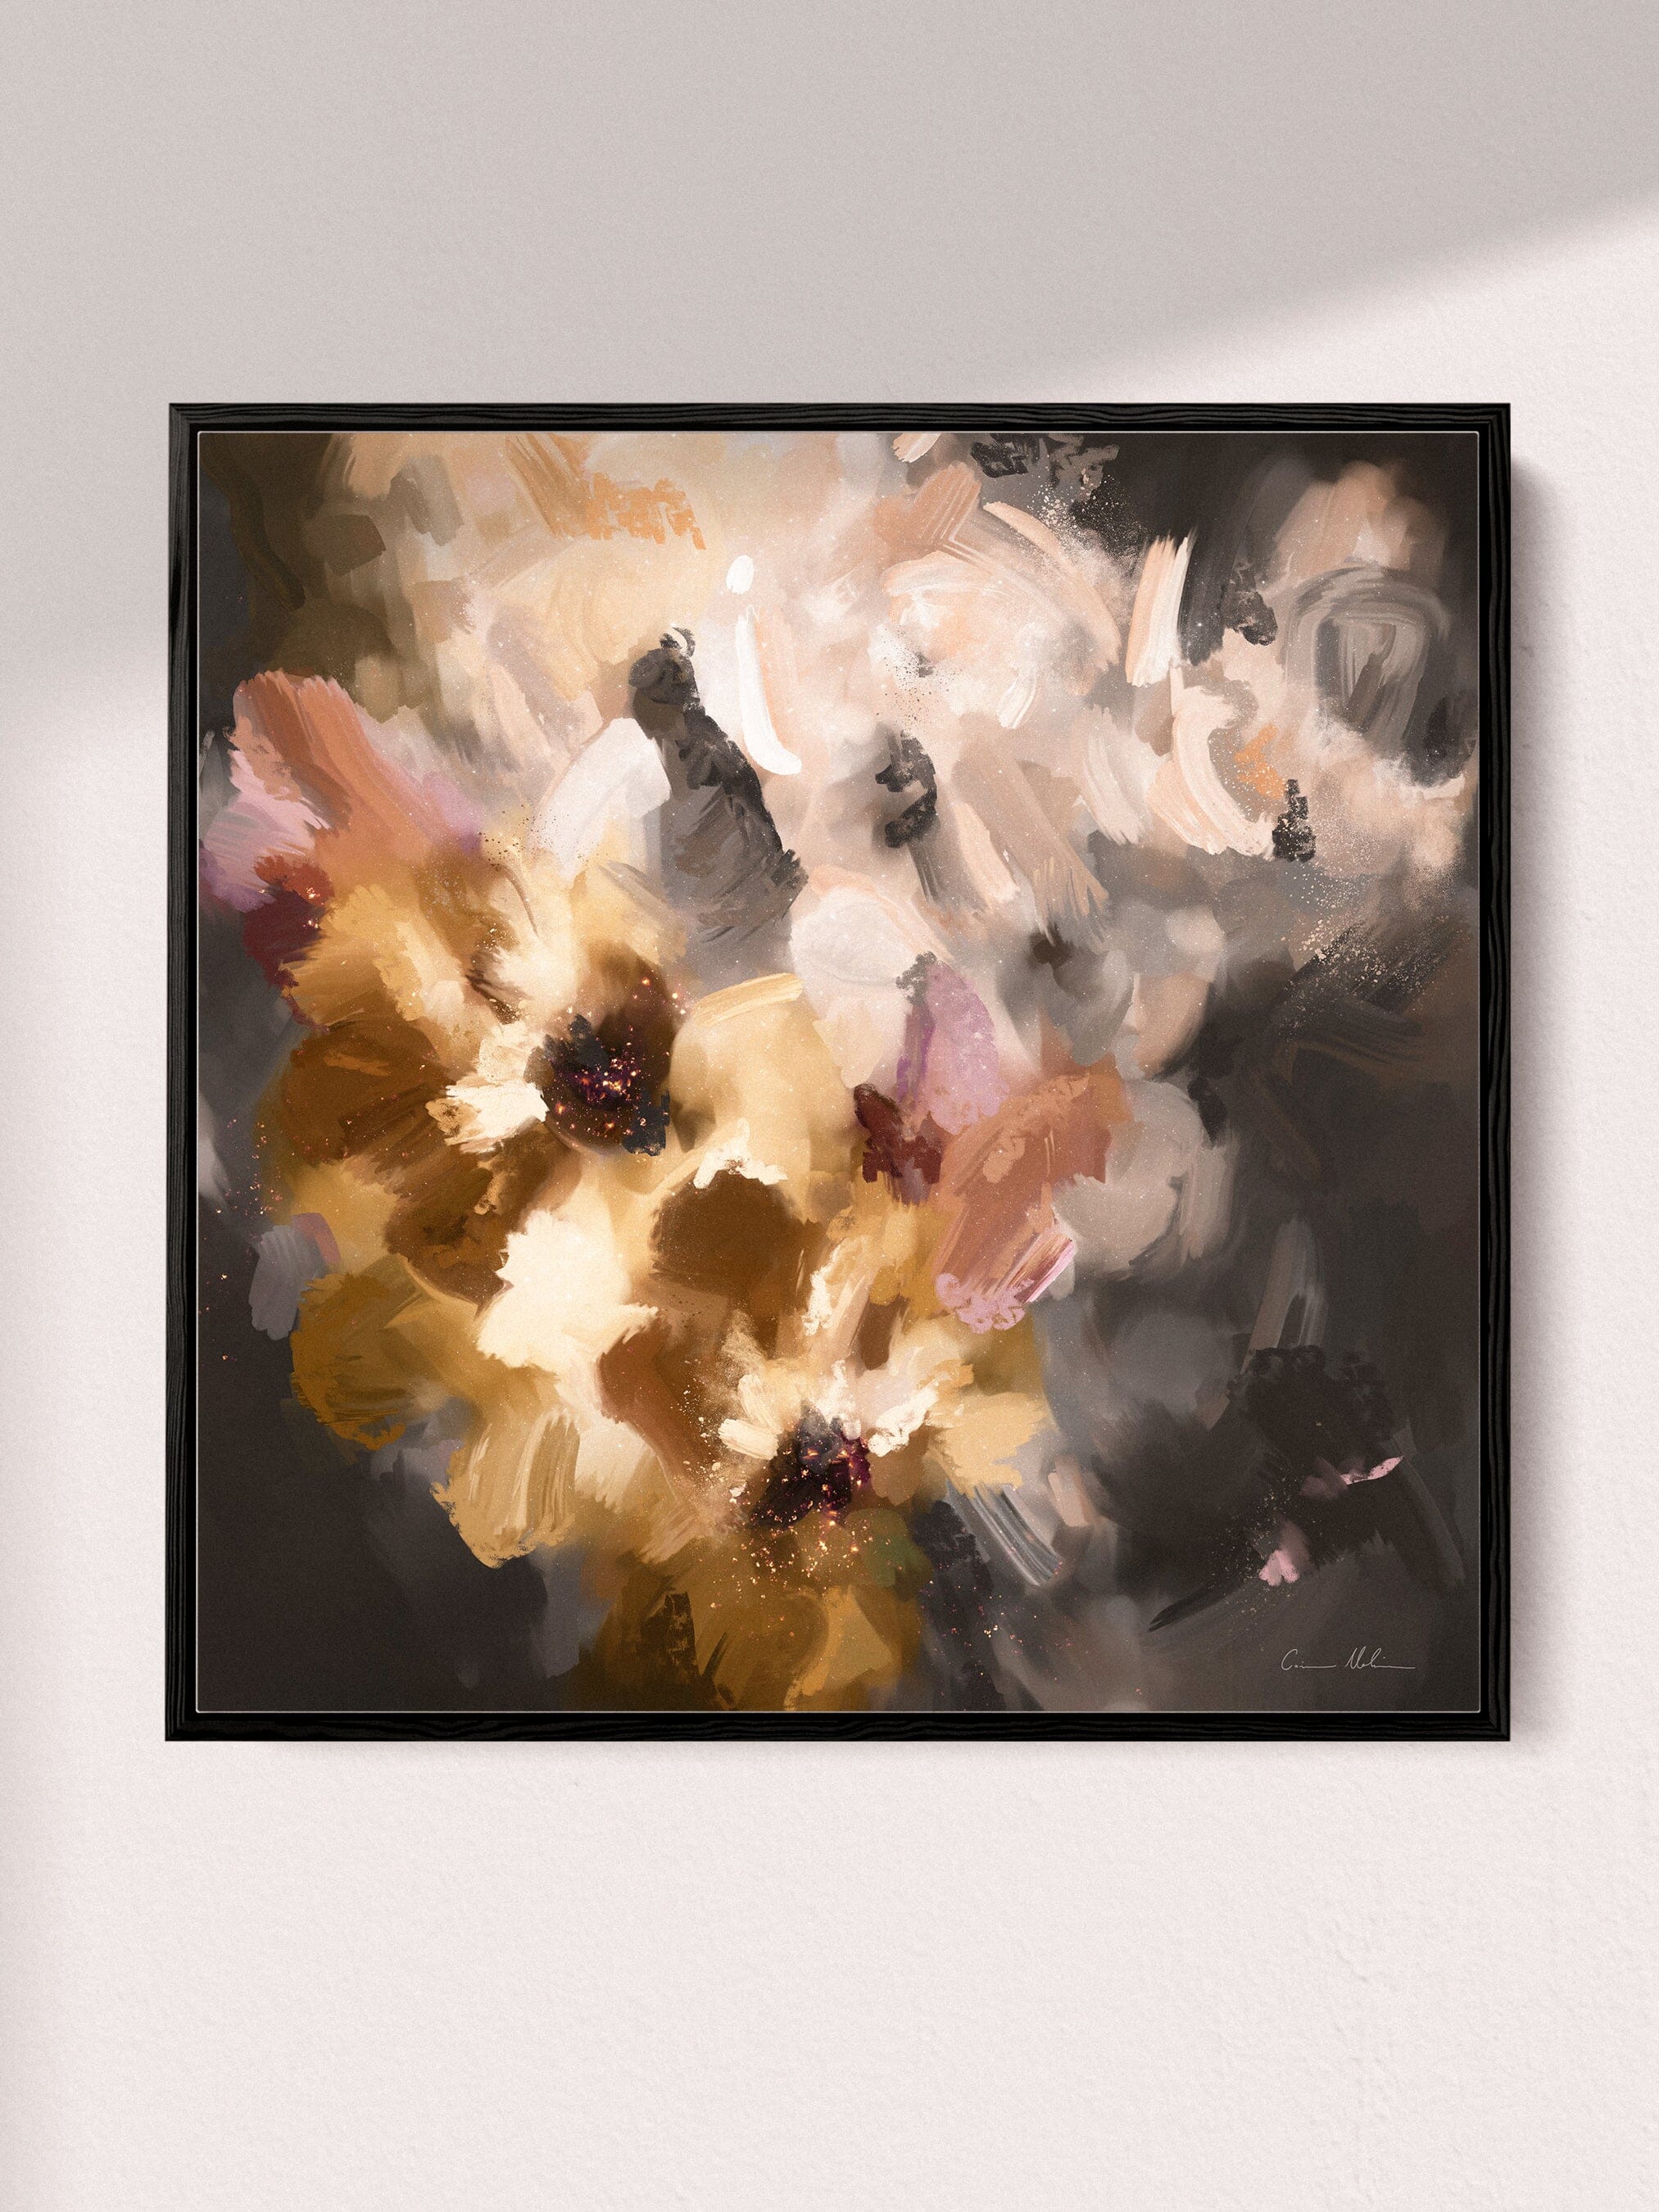 "Tokyo Bloom" on Canvas - Limited Edition Canvas Wall Art Corinne Melanie Professionally Framed - Black Square S: 20x20in / 50x50cm 